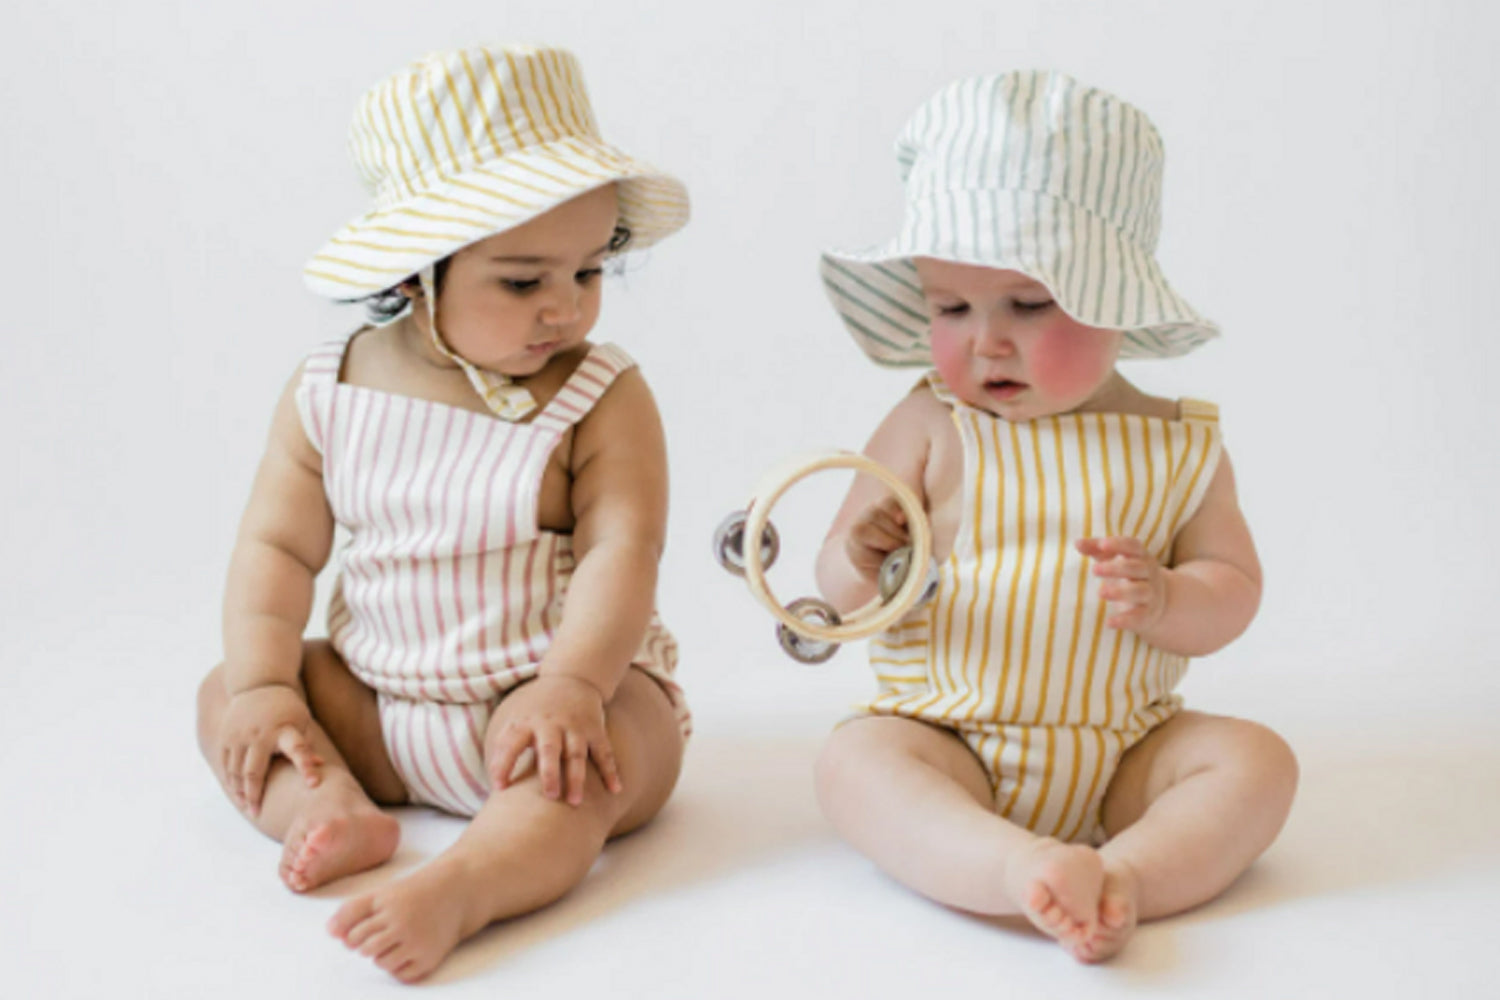 babies playing with tambourine and wearing pehr stripes away apparel